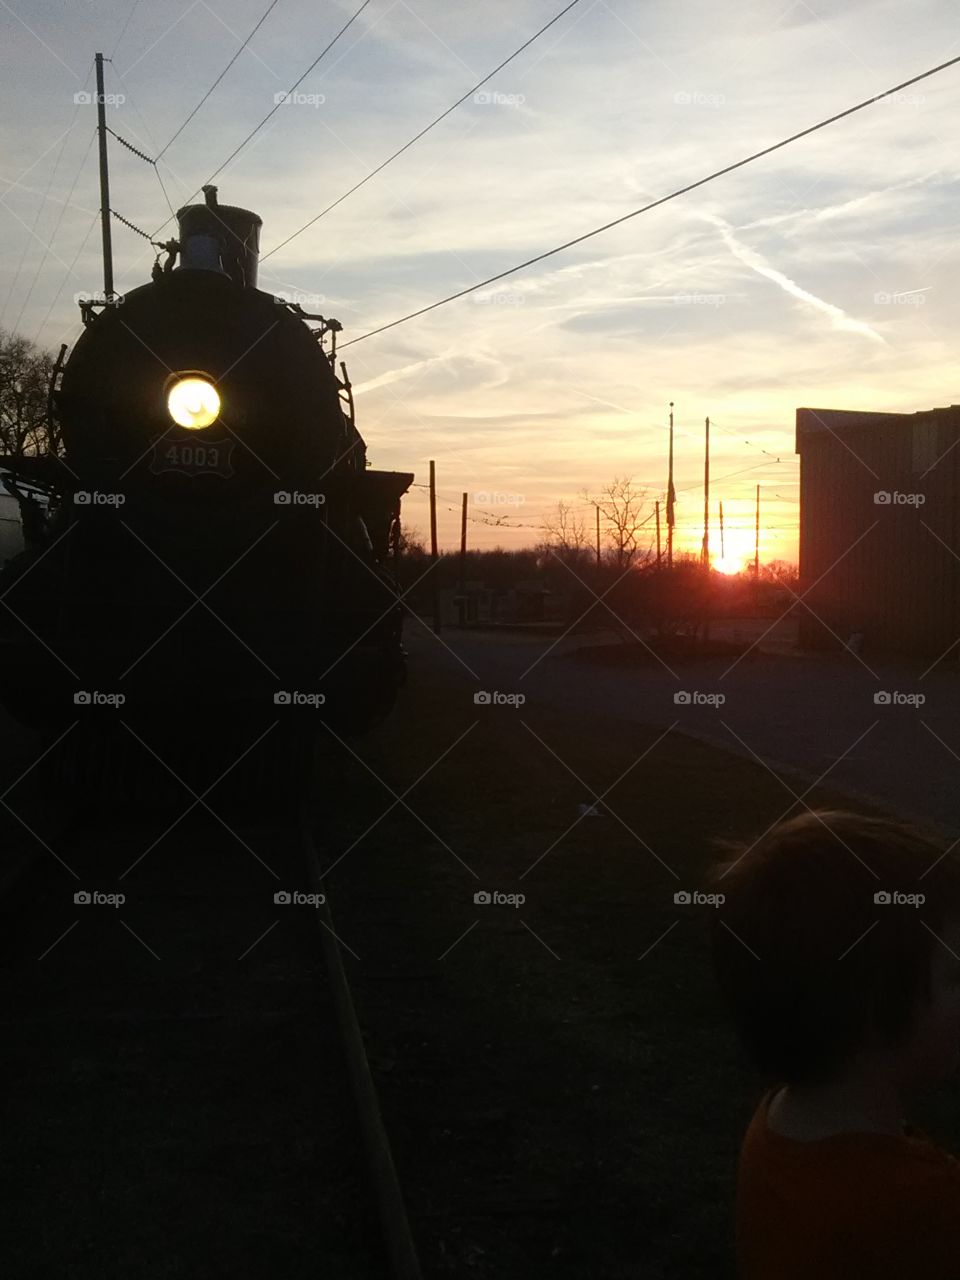 Train and sunset